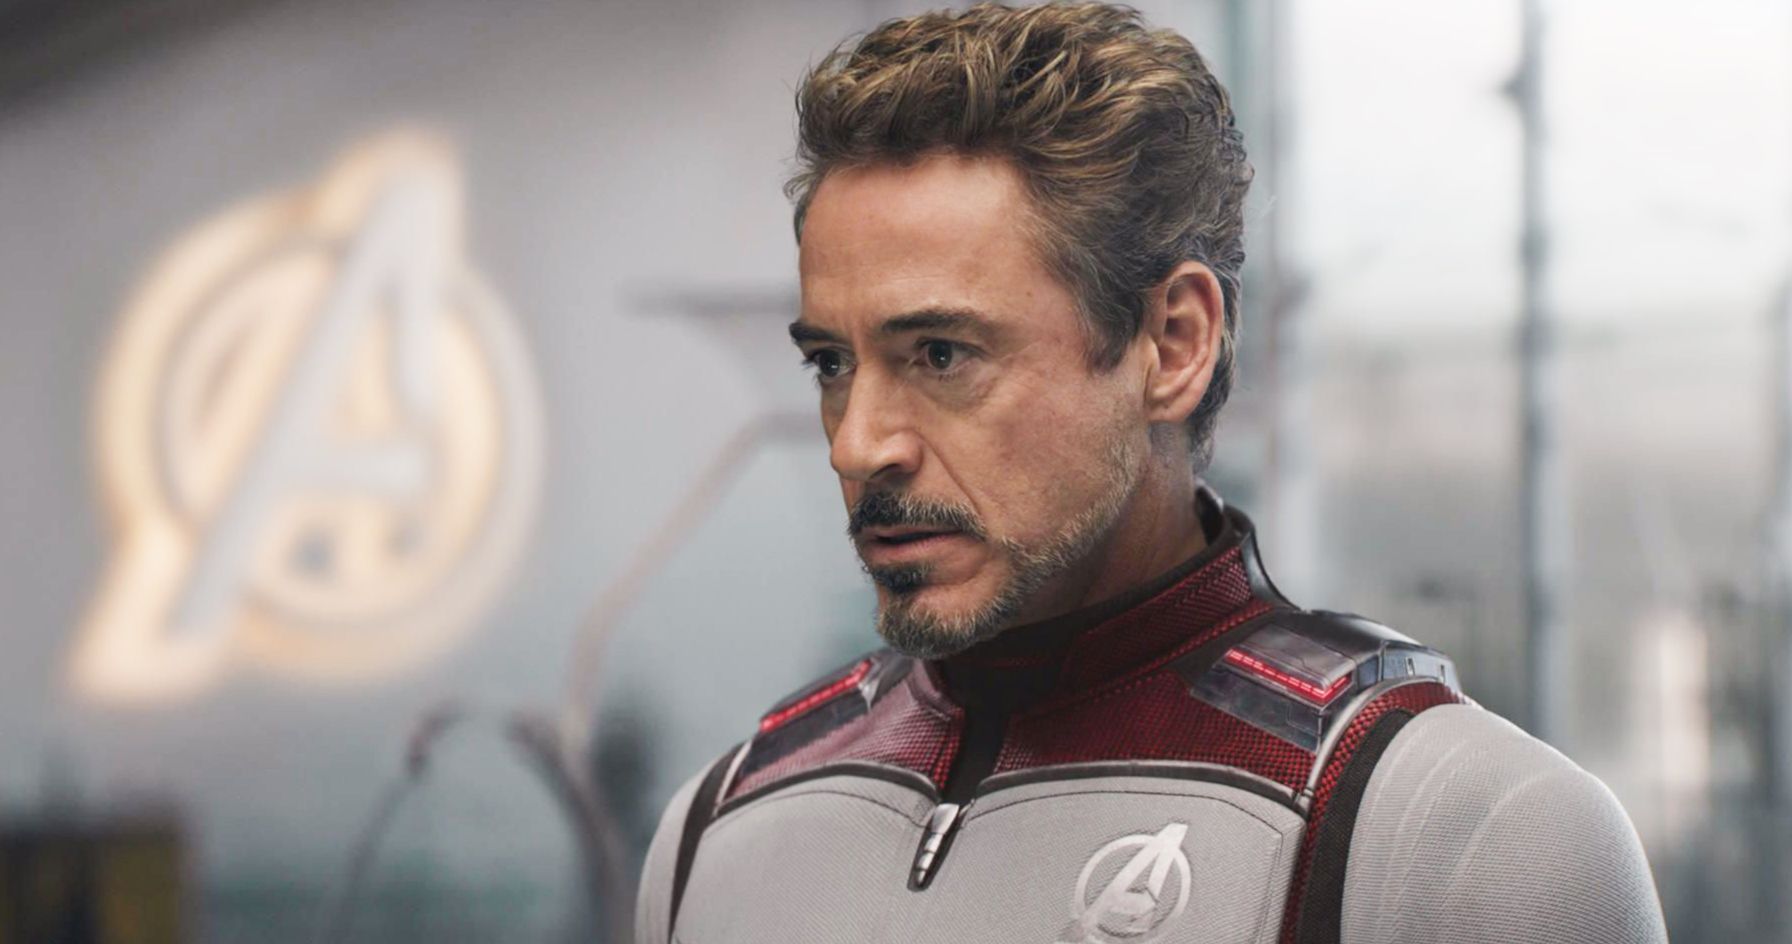 Avengers: Endgame Almost Had Iron Man Time Travel Back to a Different MCU Movie